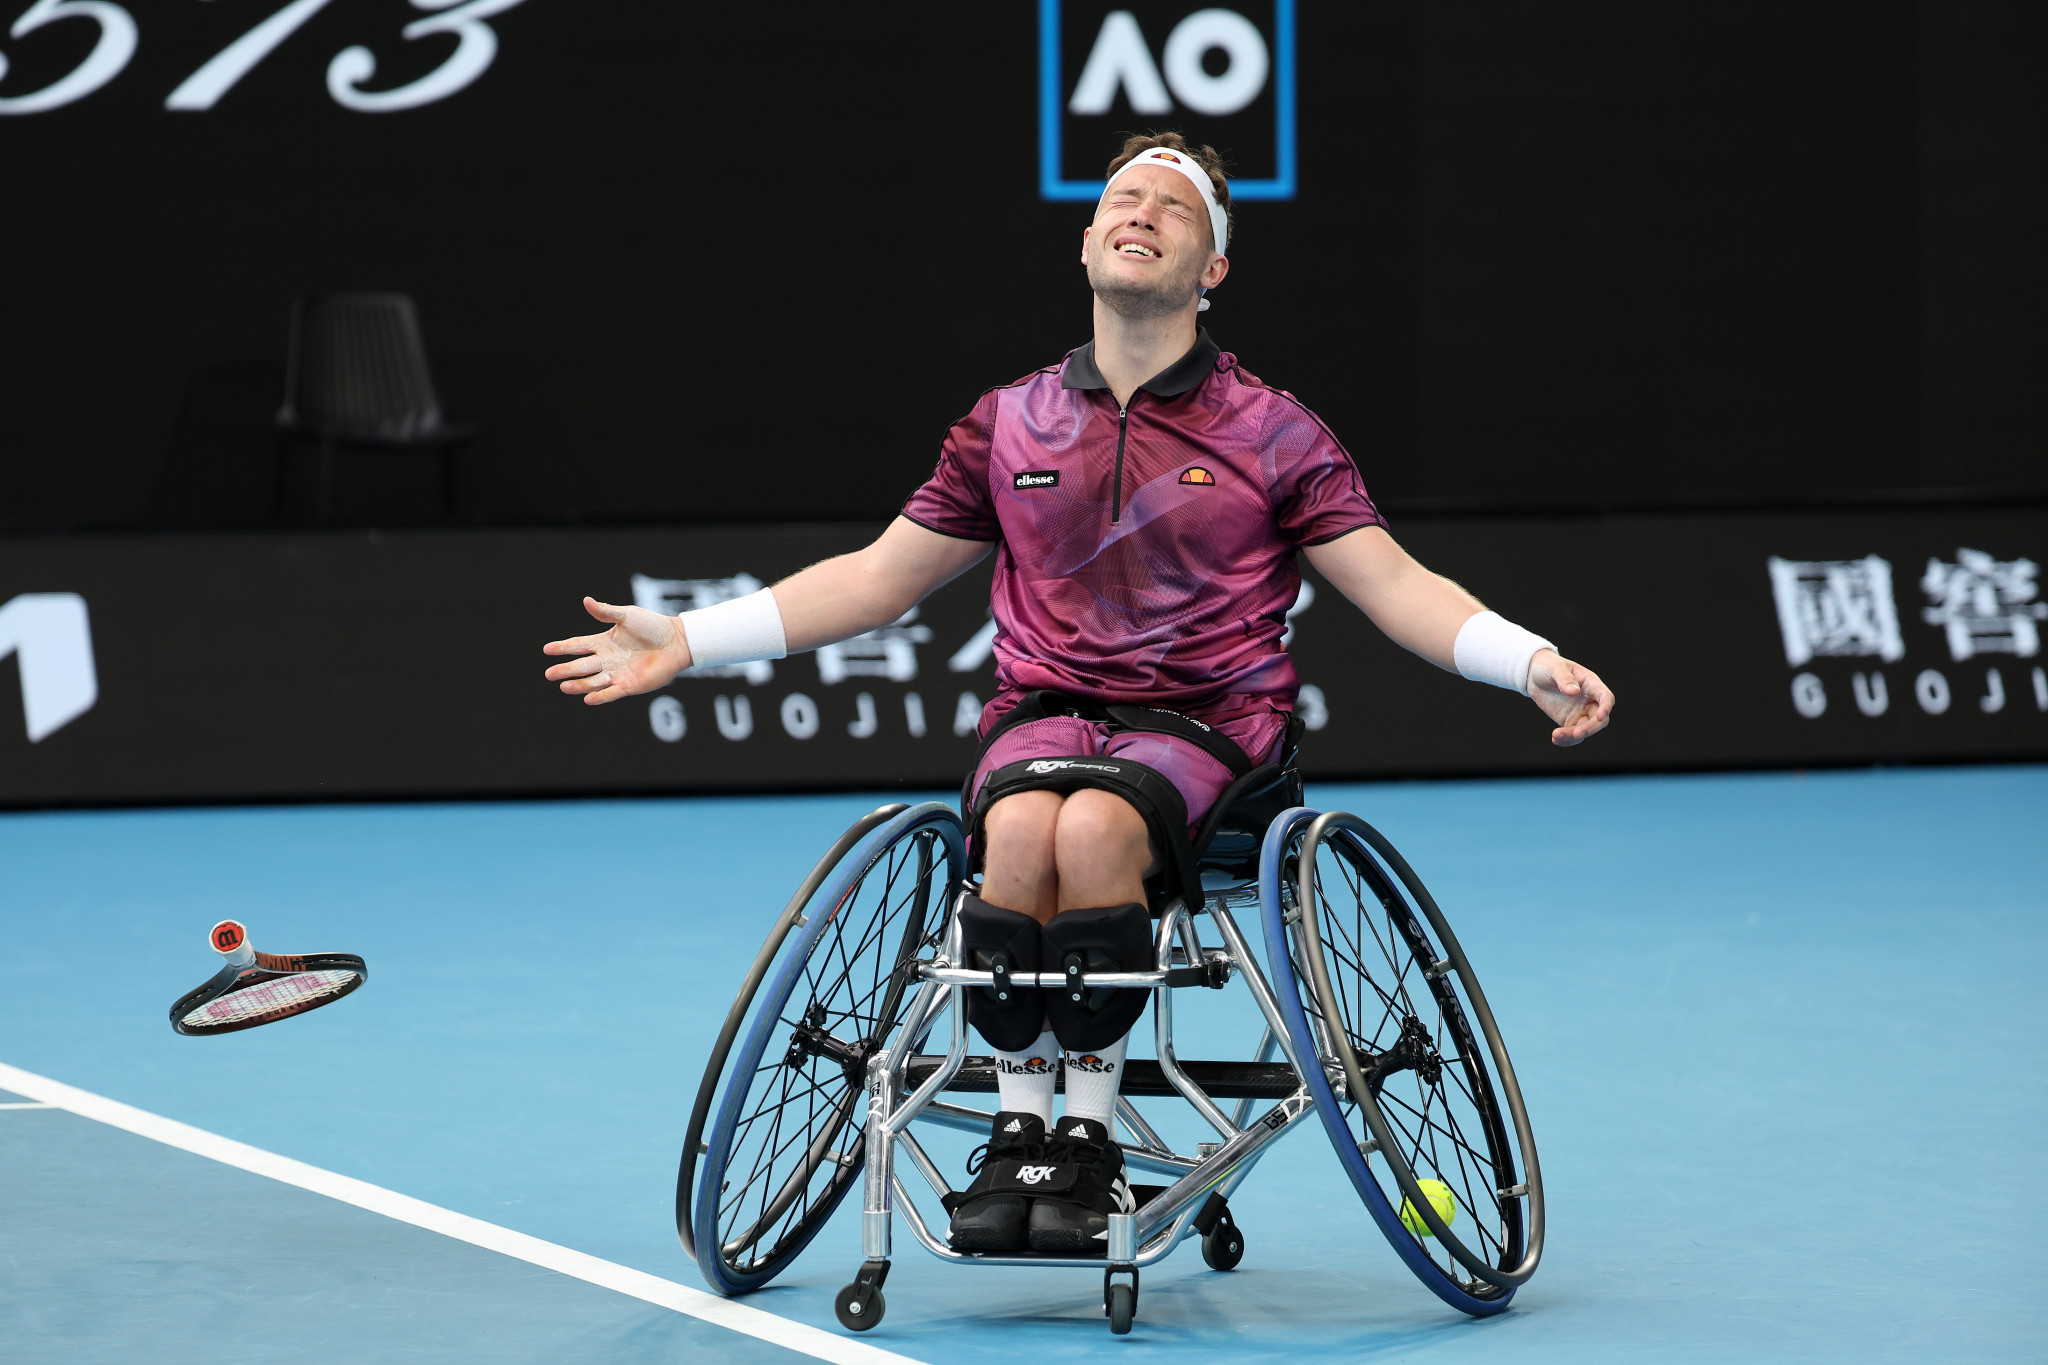 Britain's Alfie Hewett bounced back from two defeats in the men's wheelchair singles final to claim the trophy ©Getty Images